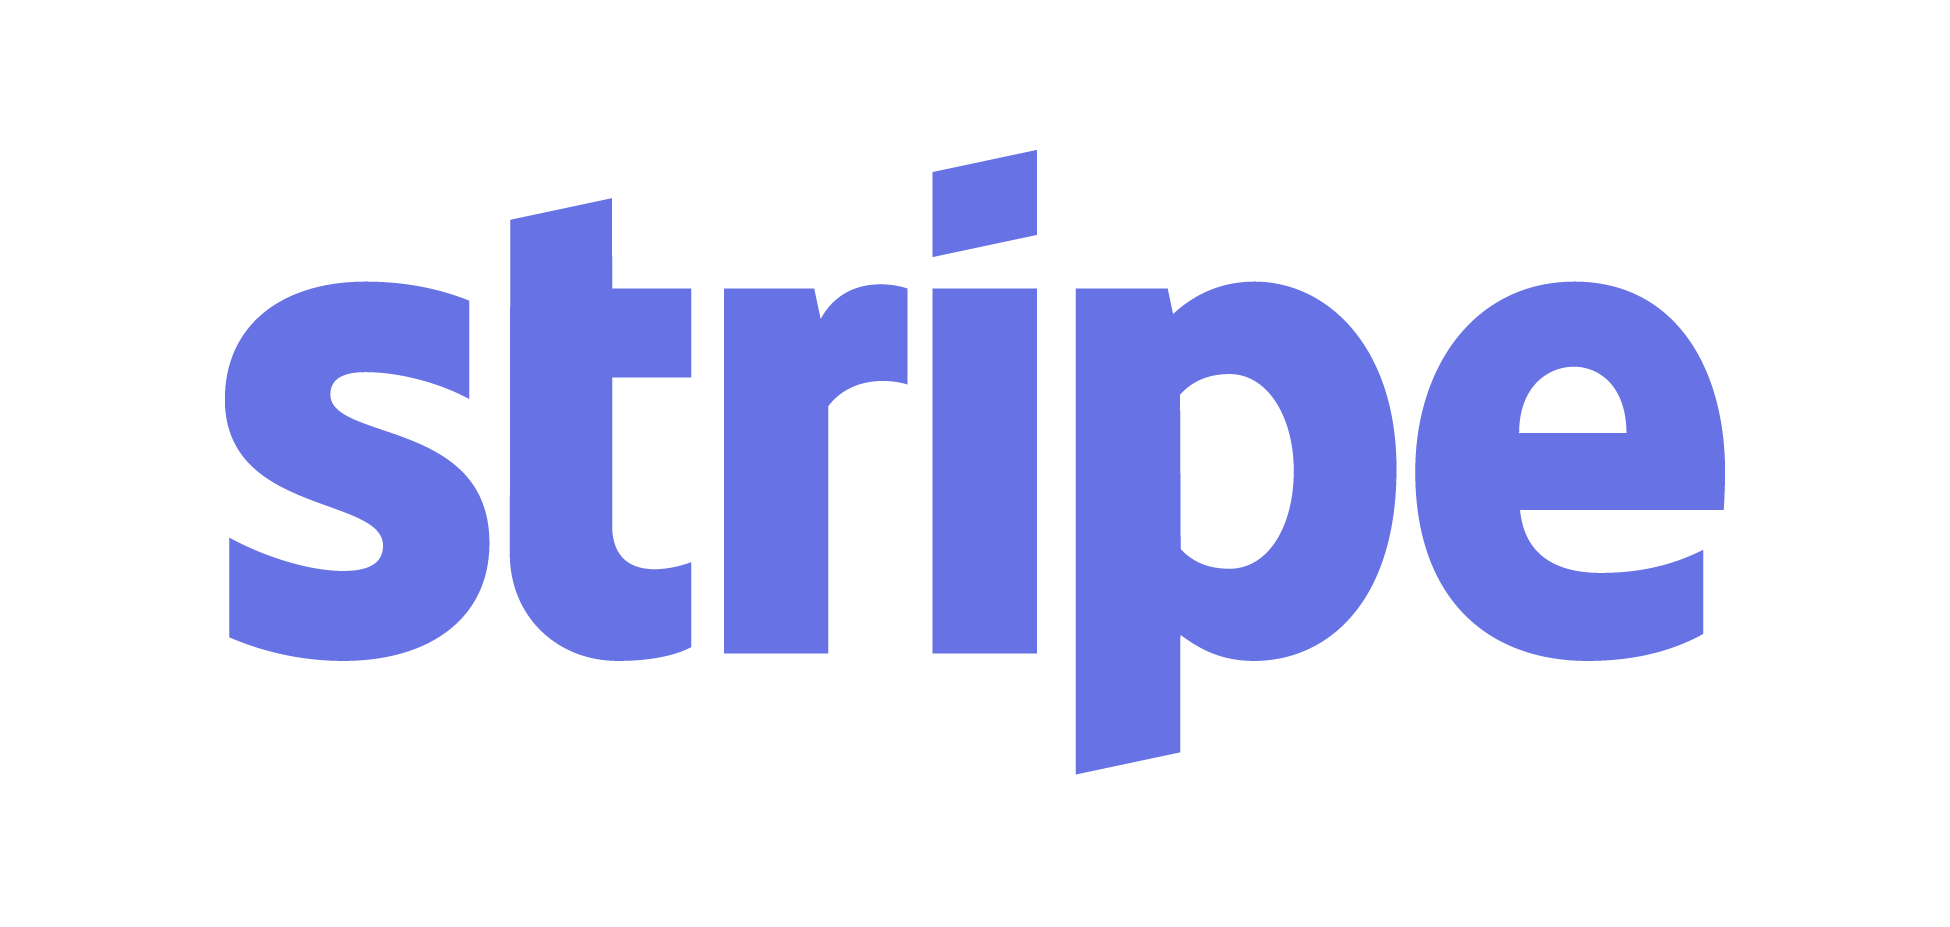 Stripe Payment System